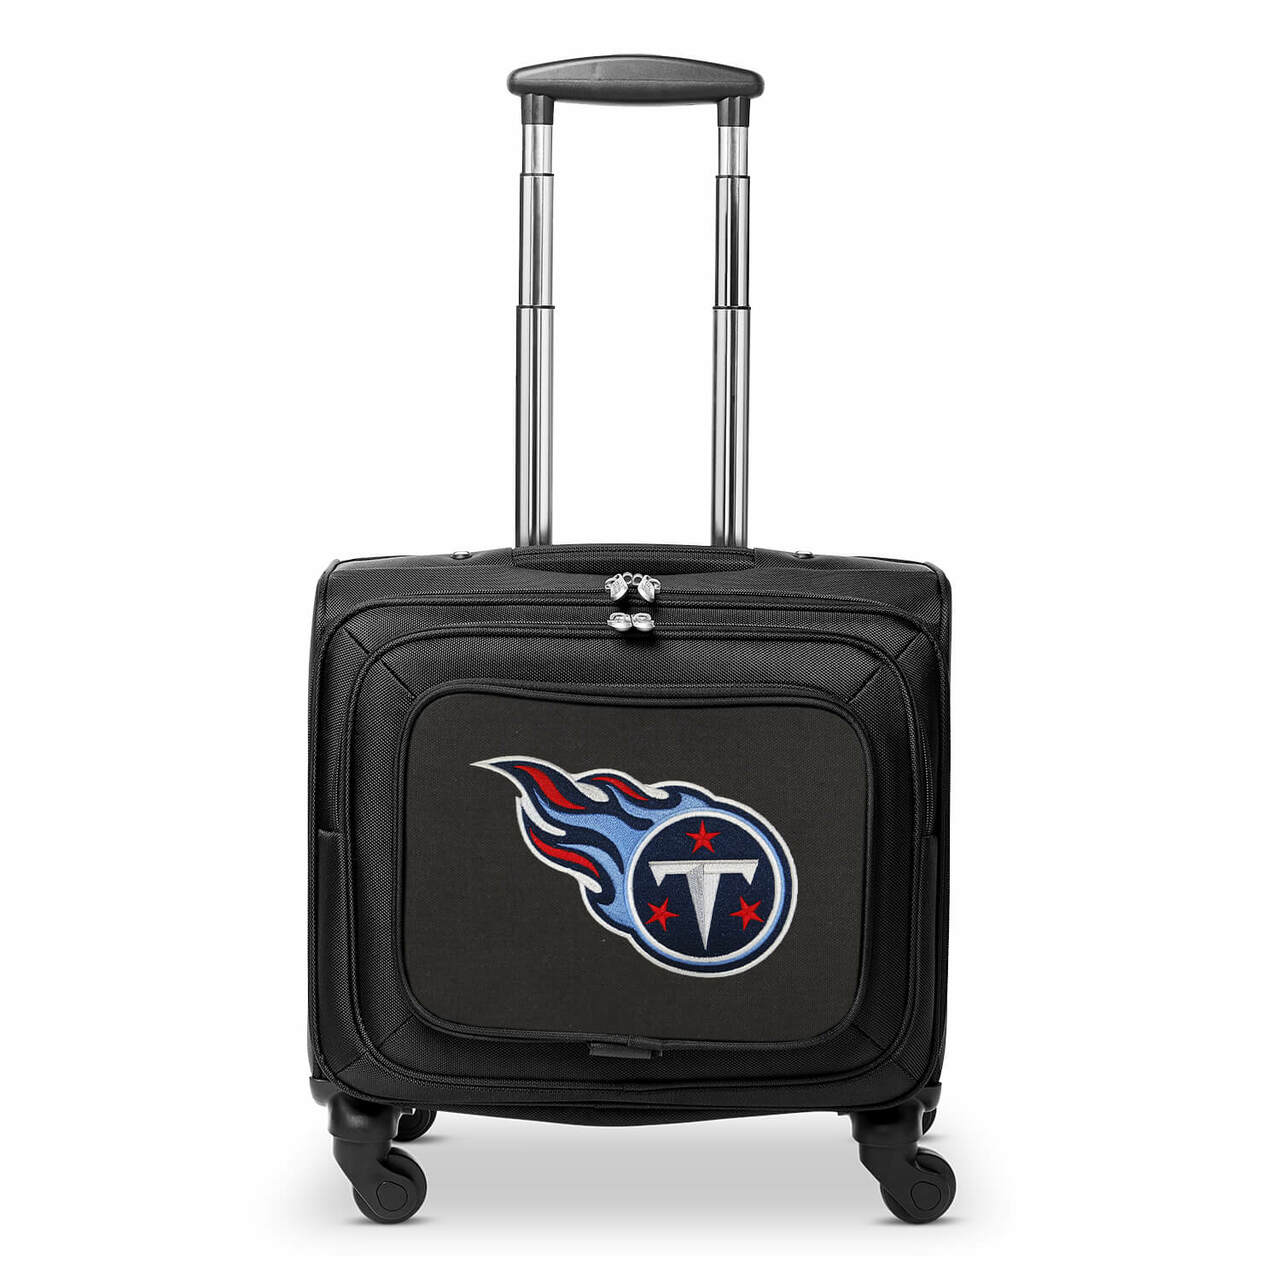 Tennessee Titans 14" Black Wheeled Laptop Overnighter